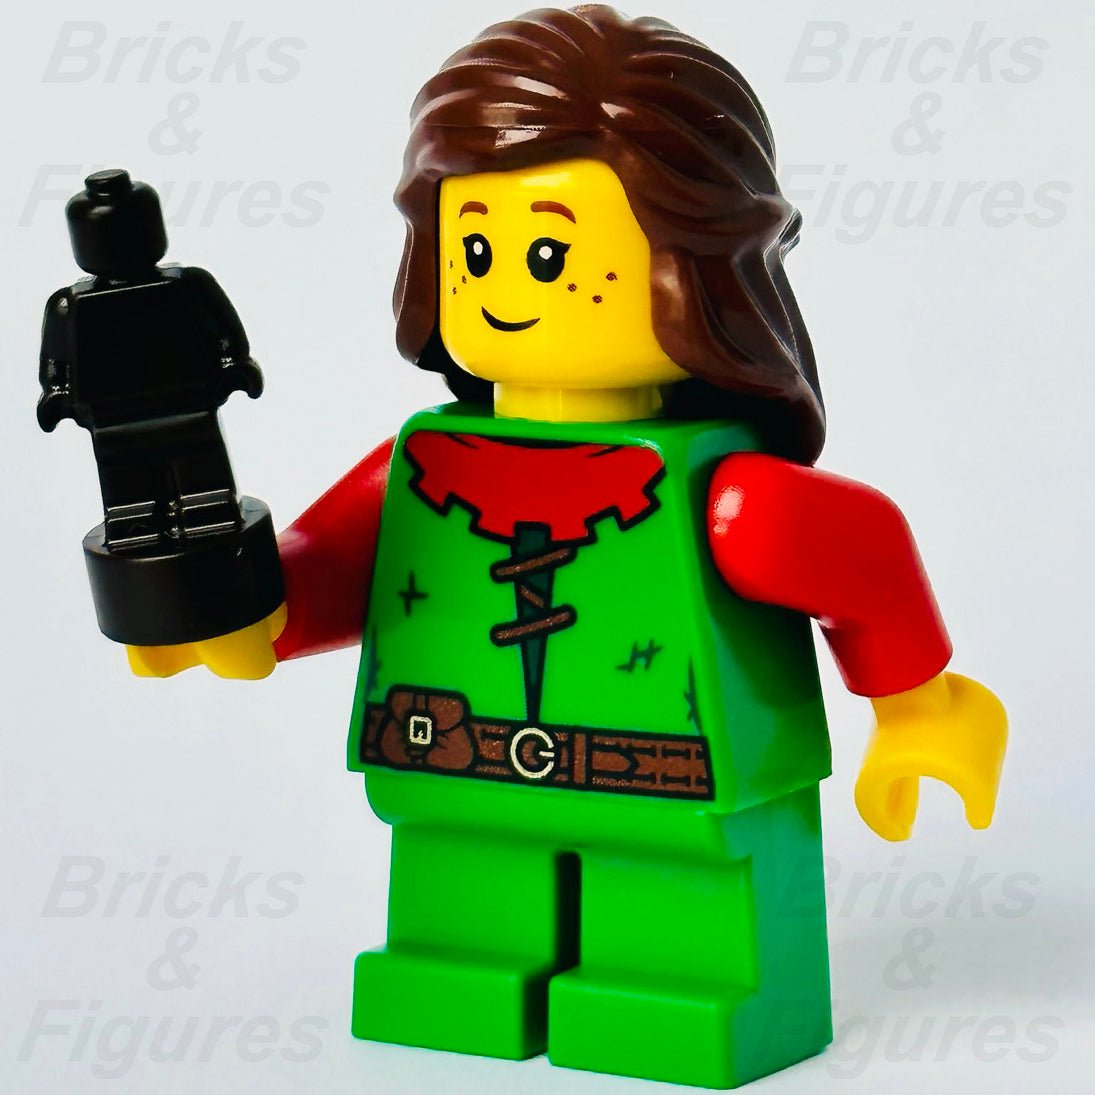 LEGO Forestwoman Castle Forestmen Minifigure with Sword & Shield 4